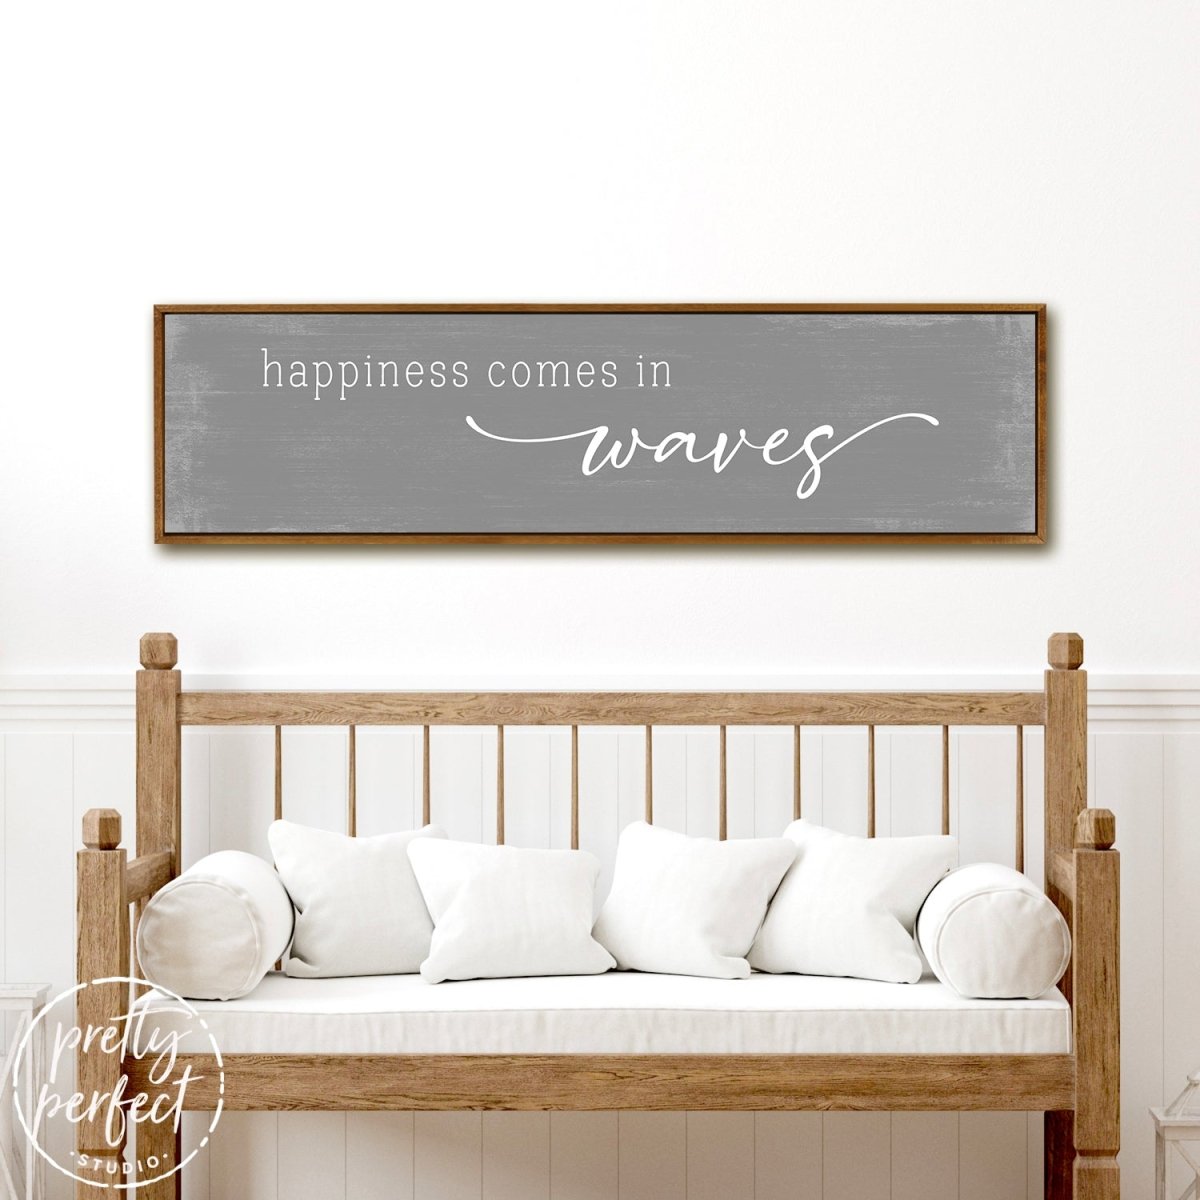 Happiness Comes in Waves Sign Above Bench - Pretty Perfect Studio